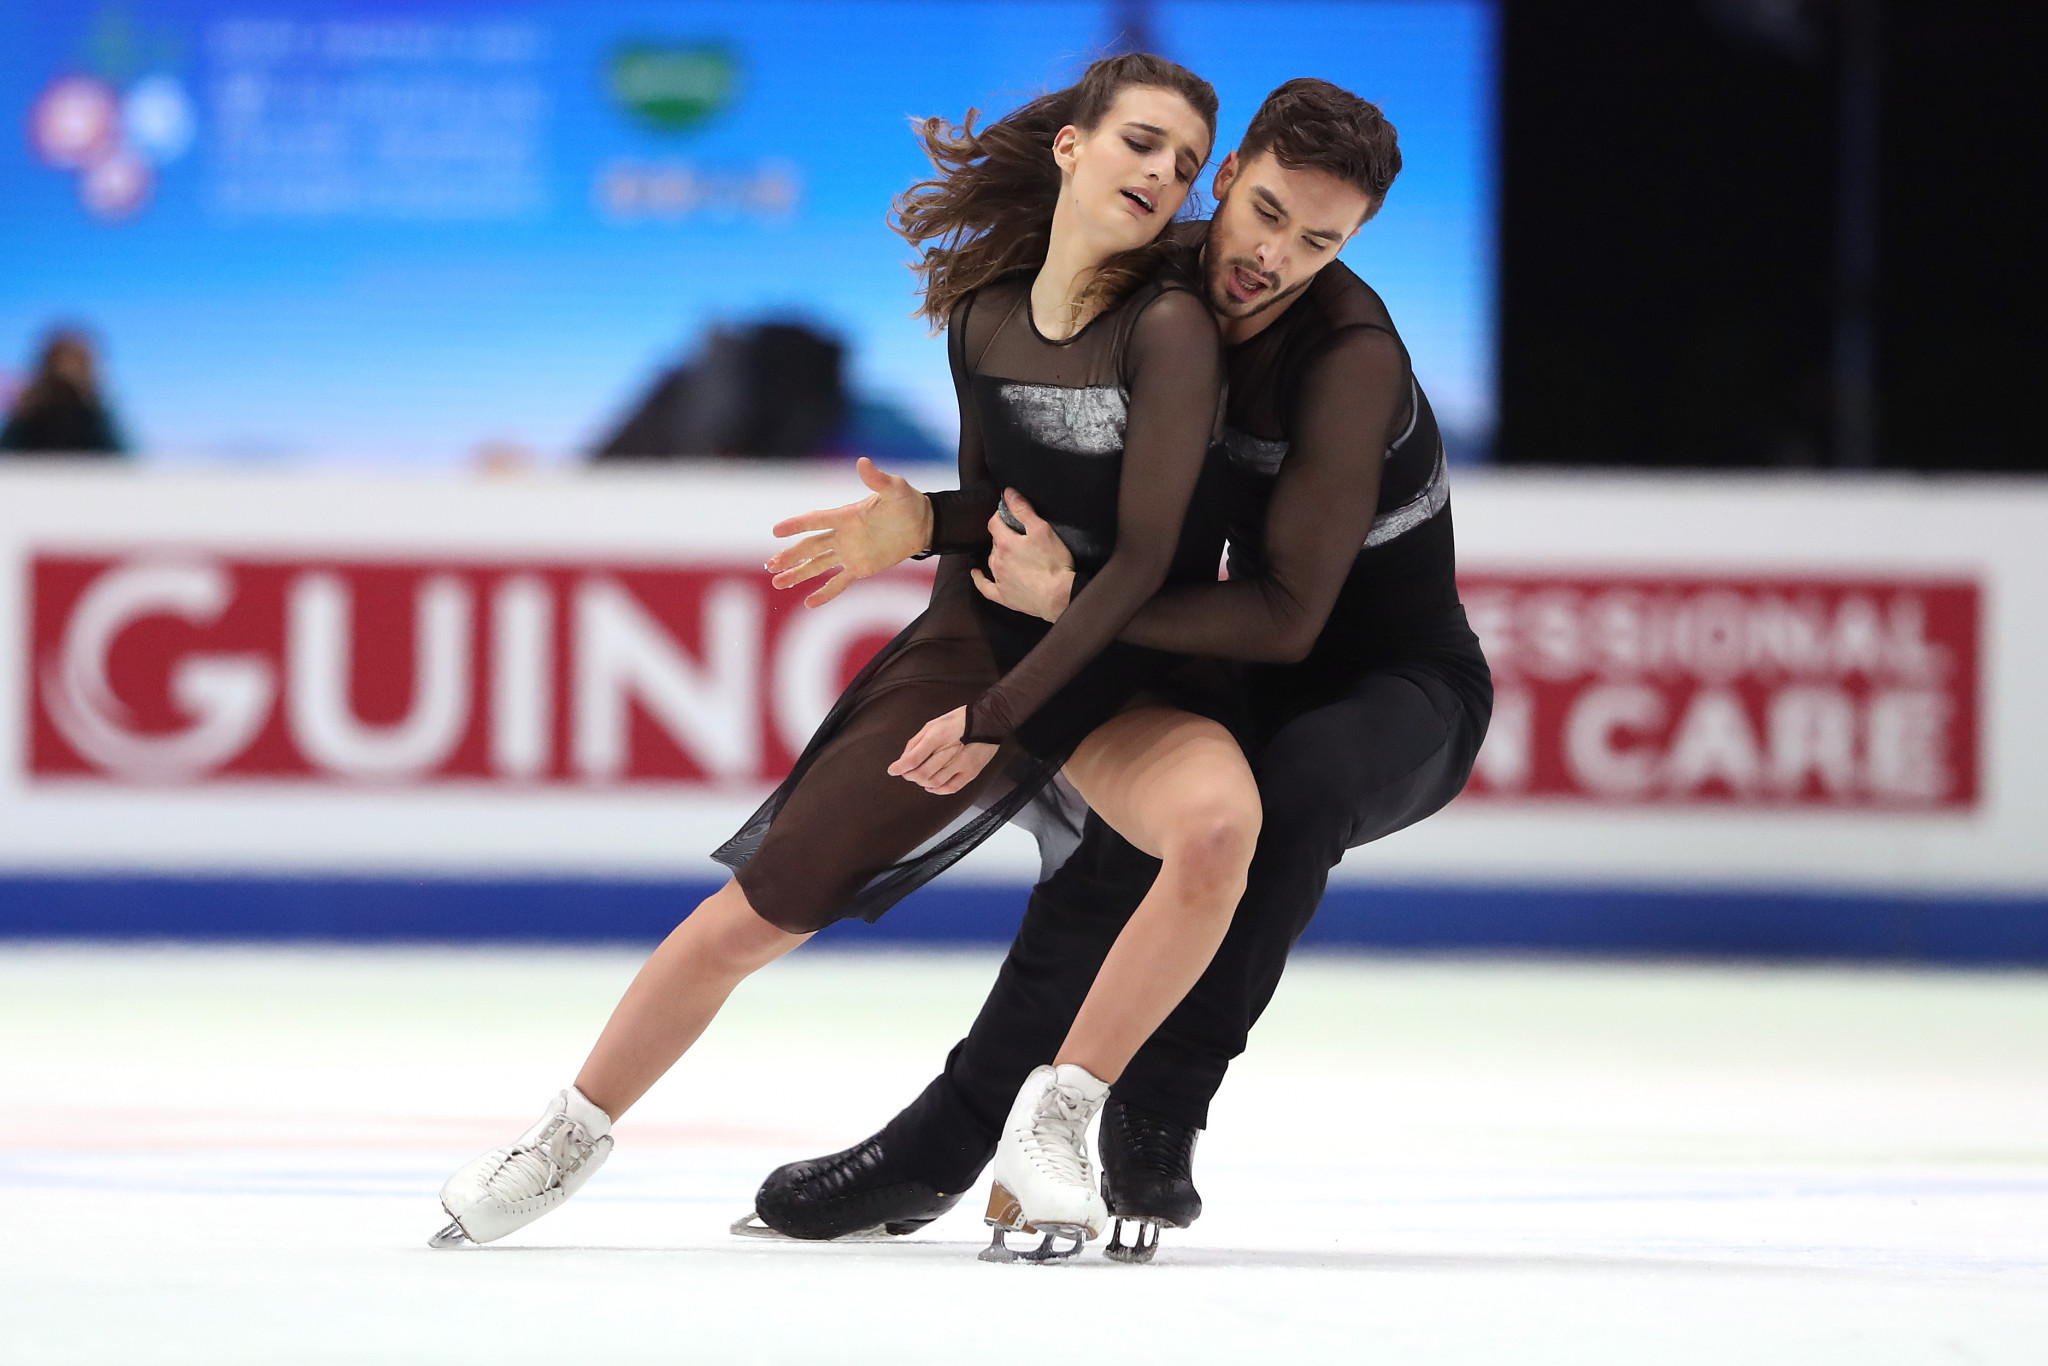 Gabriella Papadakis, left, and Guillaume Cizeron triumphed in the ice dance at the ISU Grand Prix of Figure Skating in Grenoble ©Getty Images